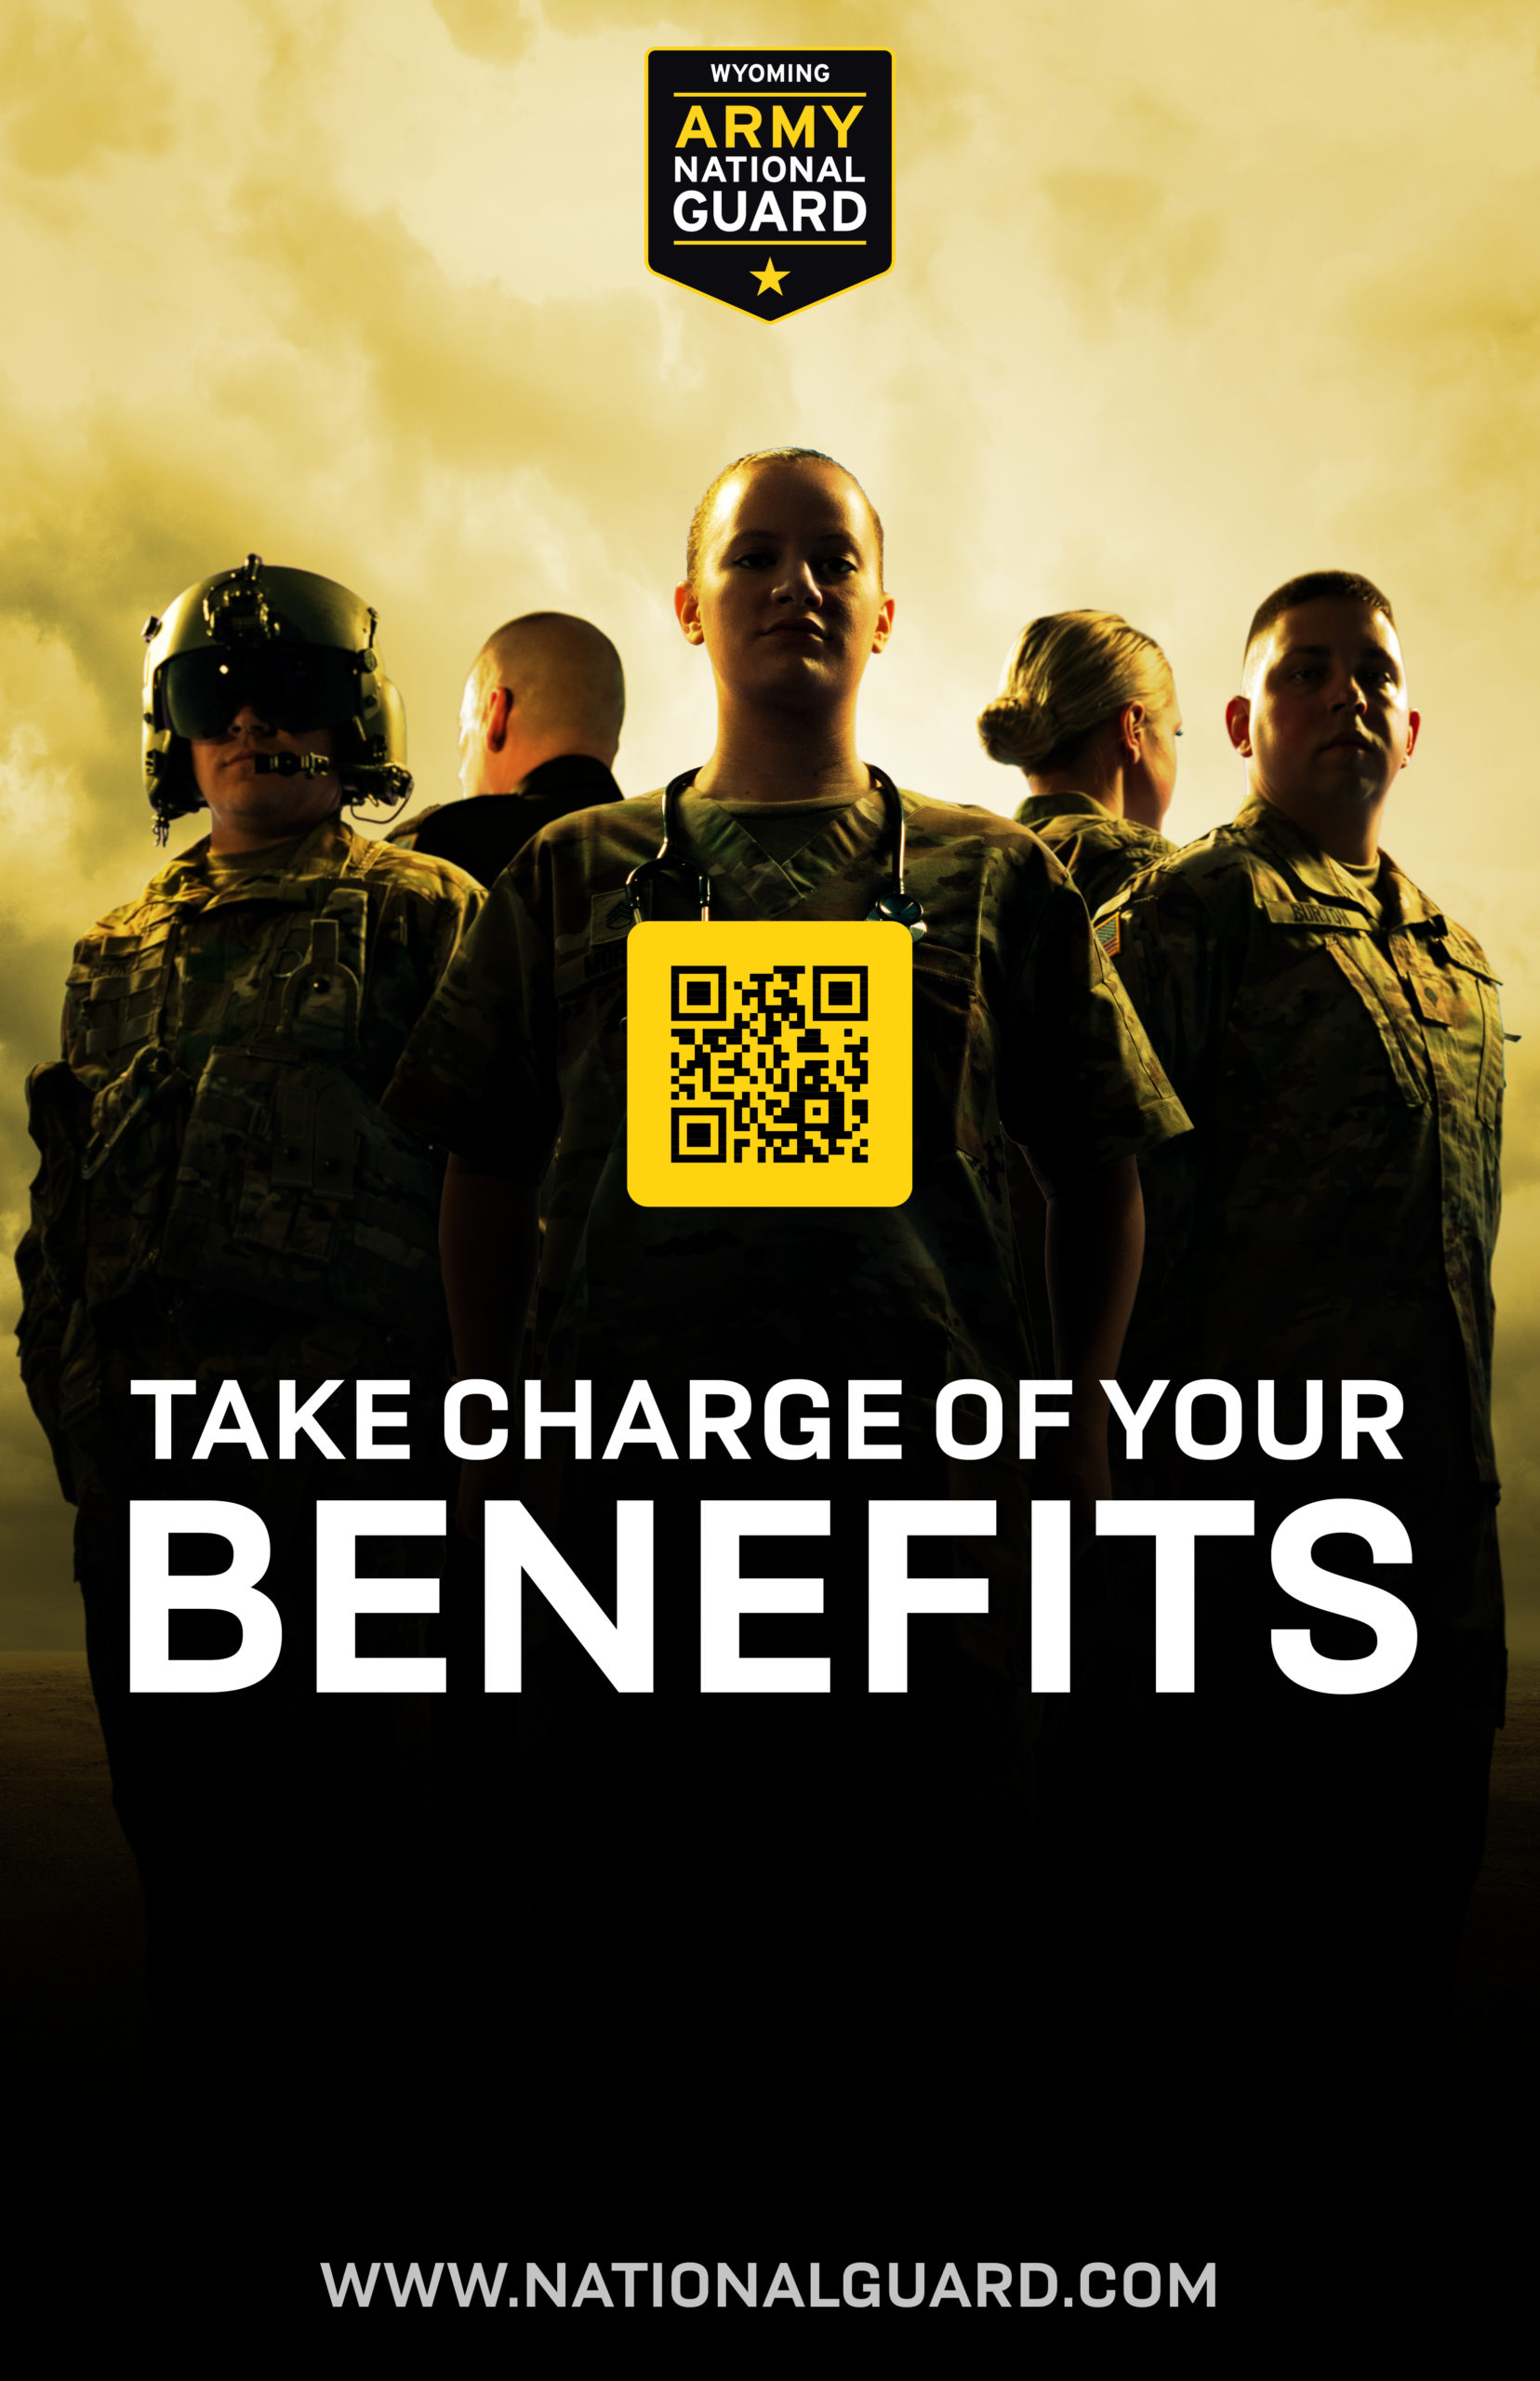 Poster with people dressed in National Guard Uniforms against a yellow background. The text reads "Take charge of your benefits"